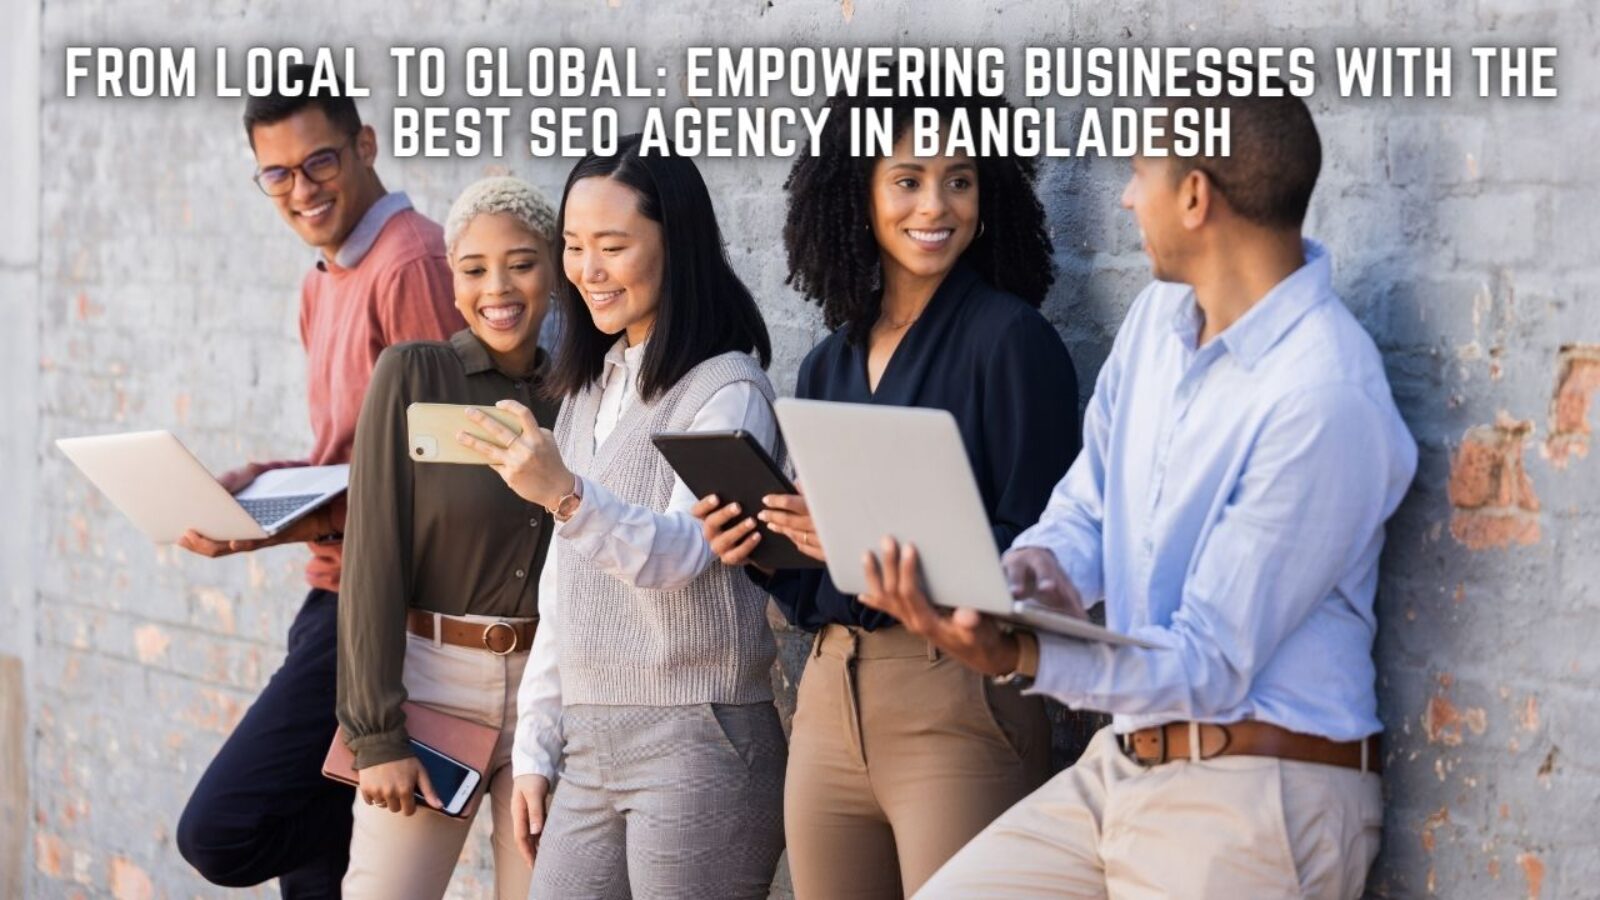 From Local to Global: Empowering Businesses with the Best SEO Agency in Bangladesh